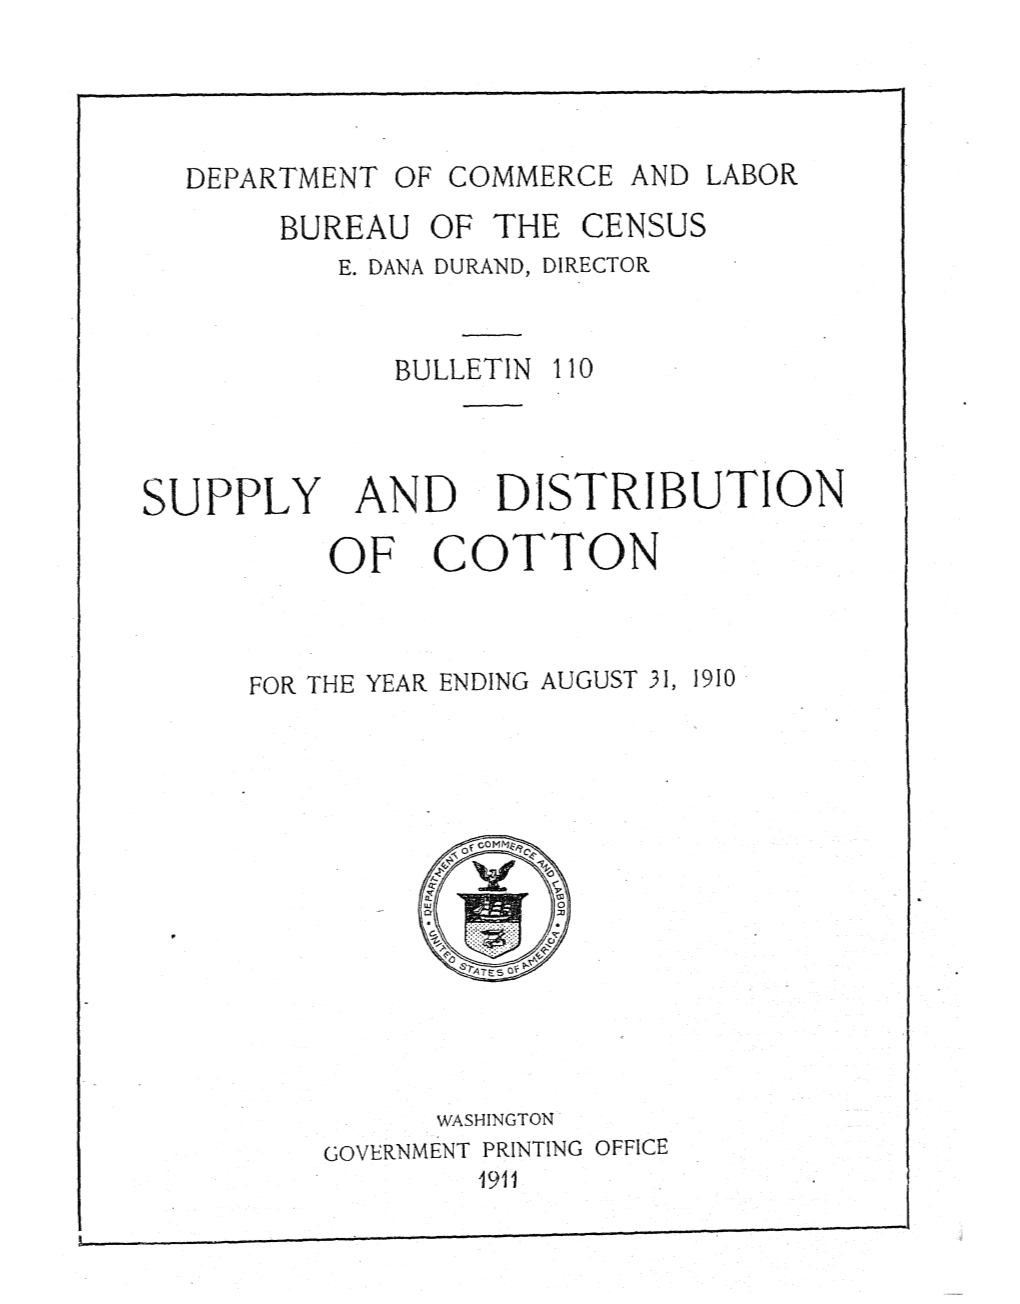 Bulletin 110. Supply and Distribution of Cotton for the Year Ending